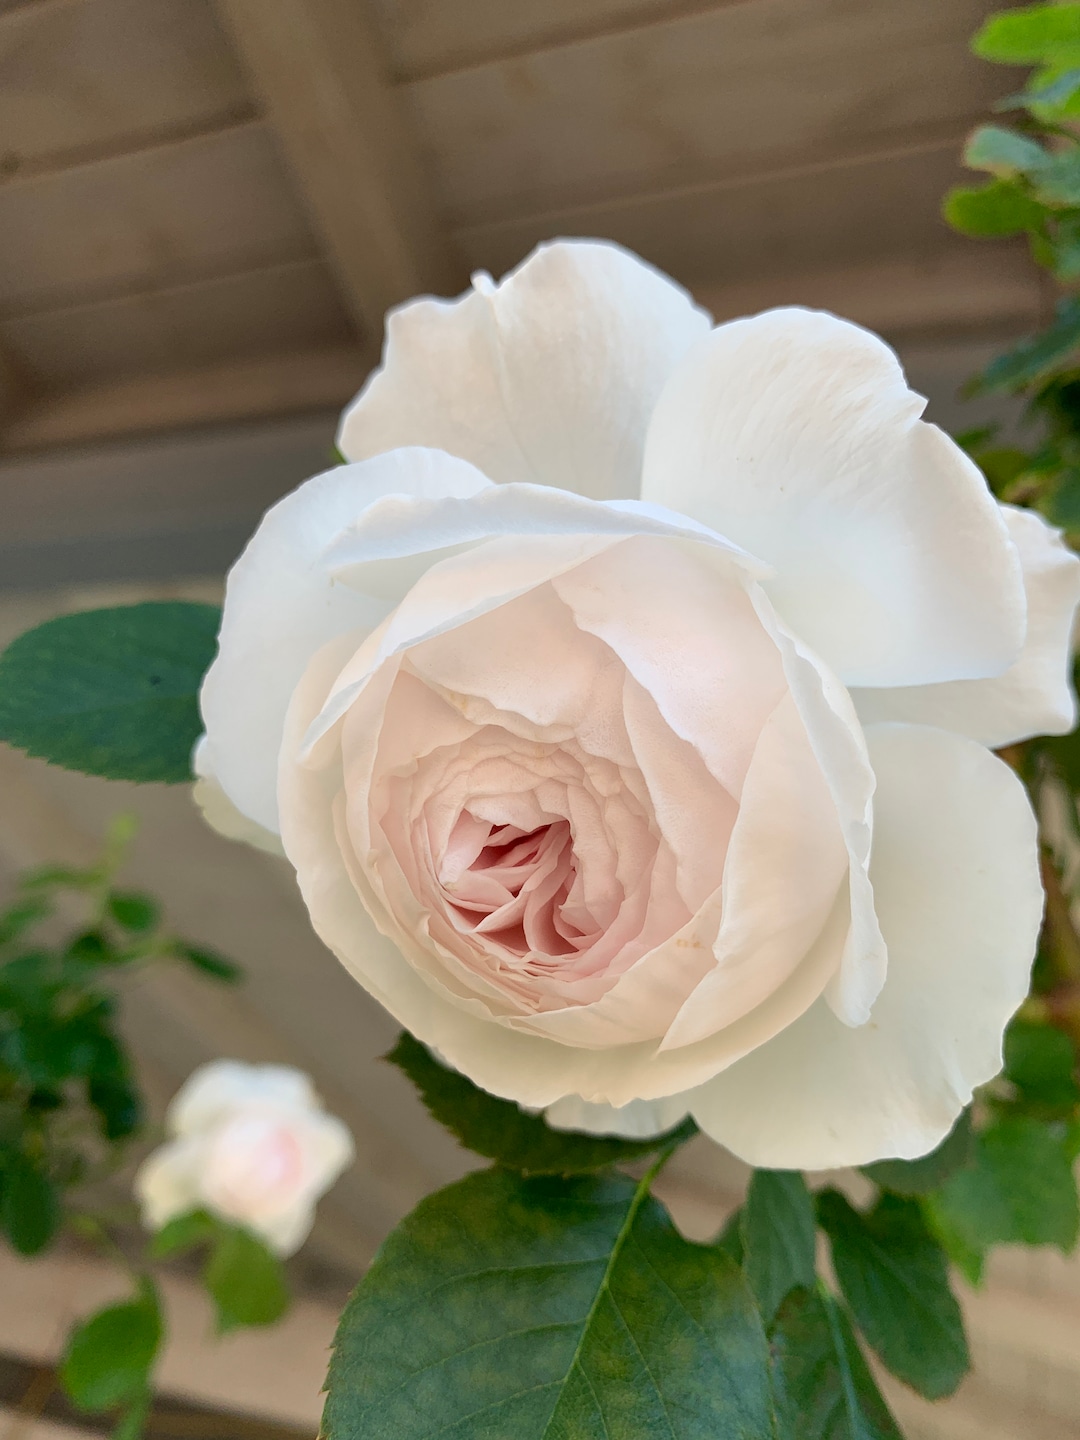 Earth Angel Floribunda Rose Non-grafted own-root Over 3 - Etsy